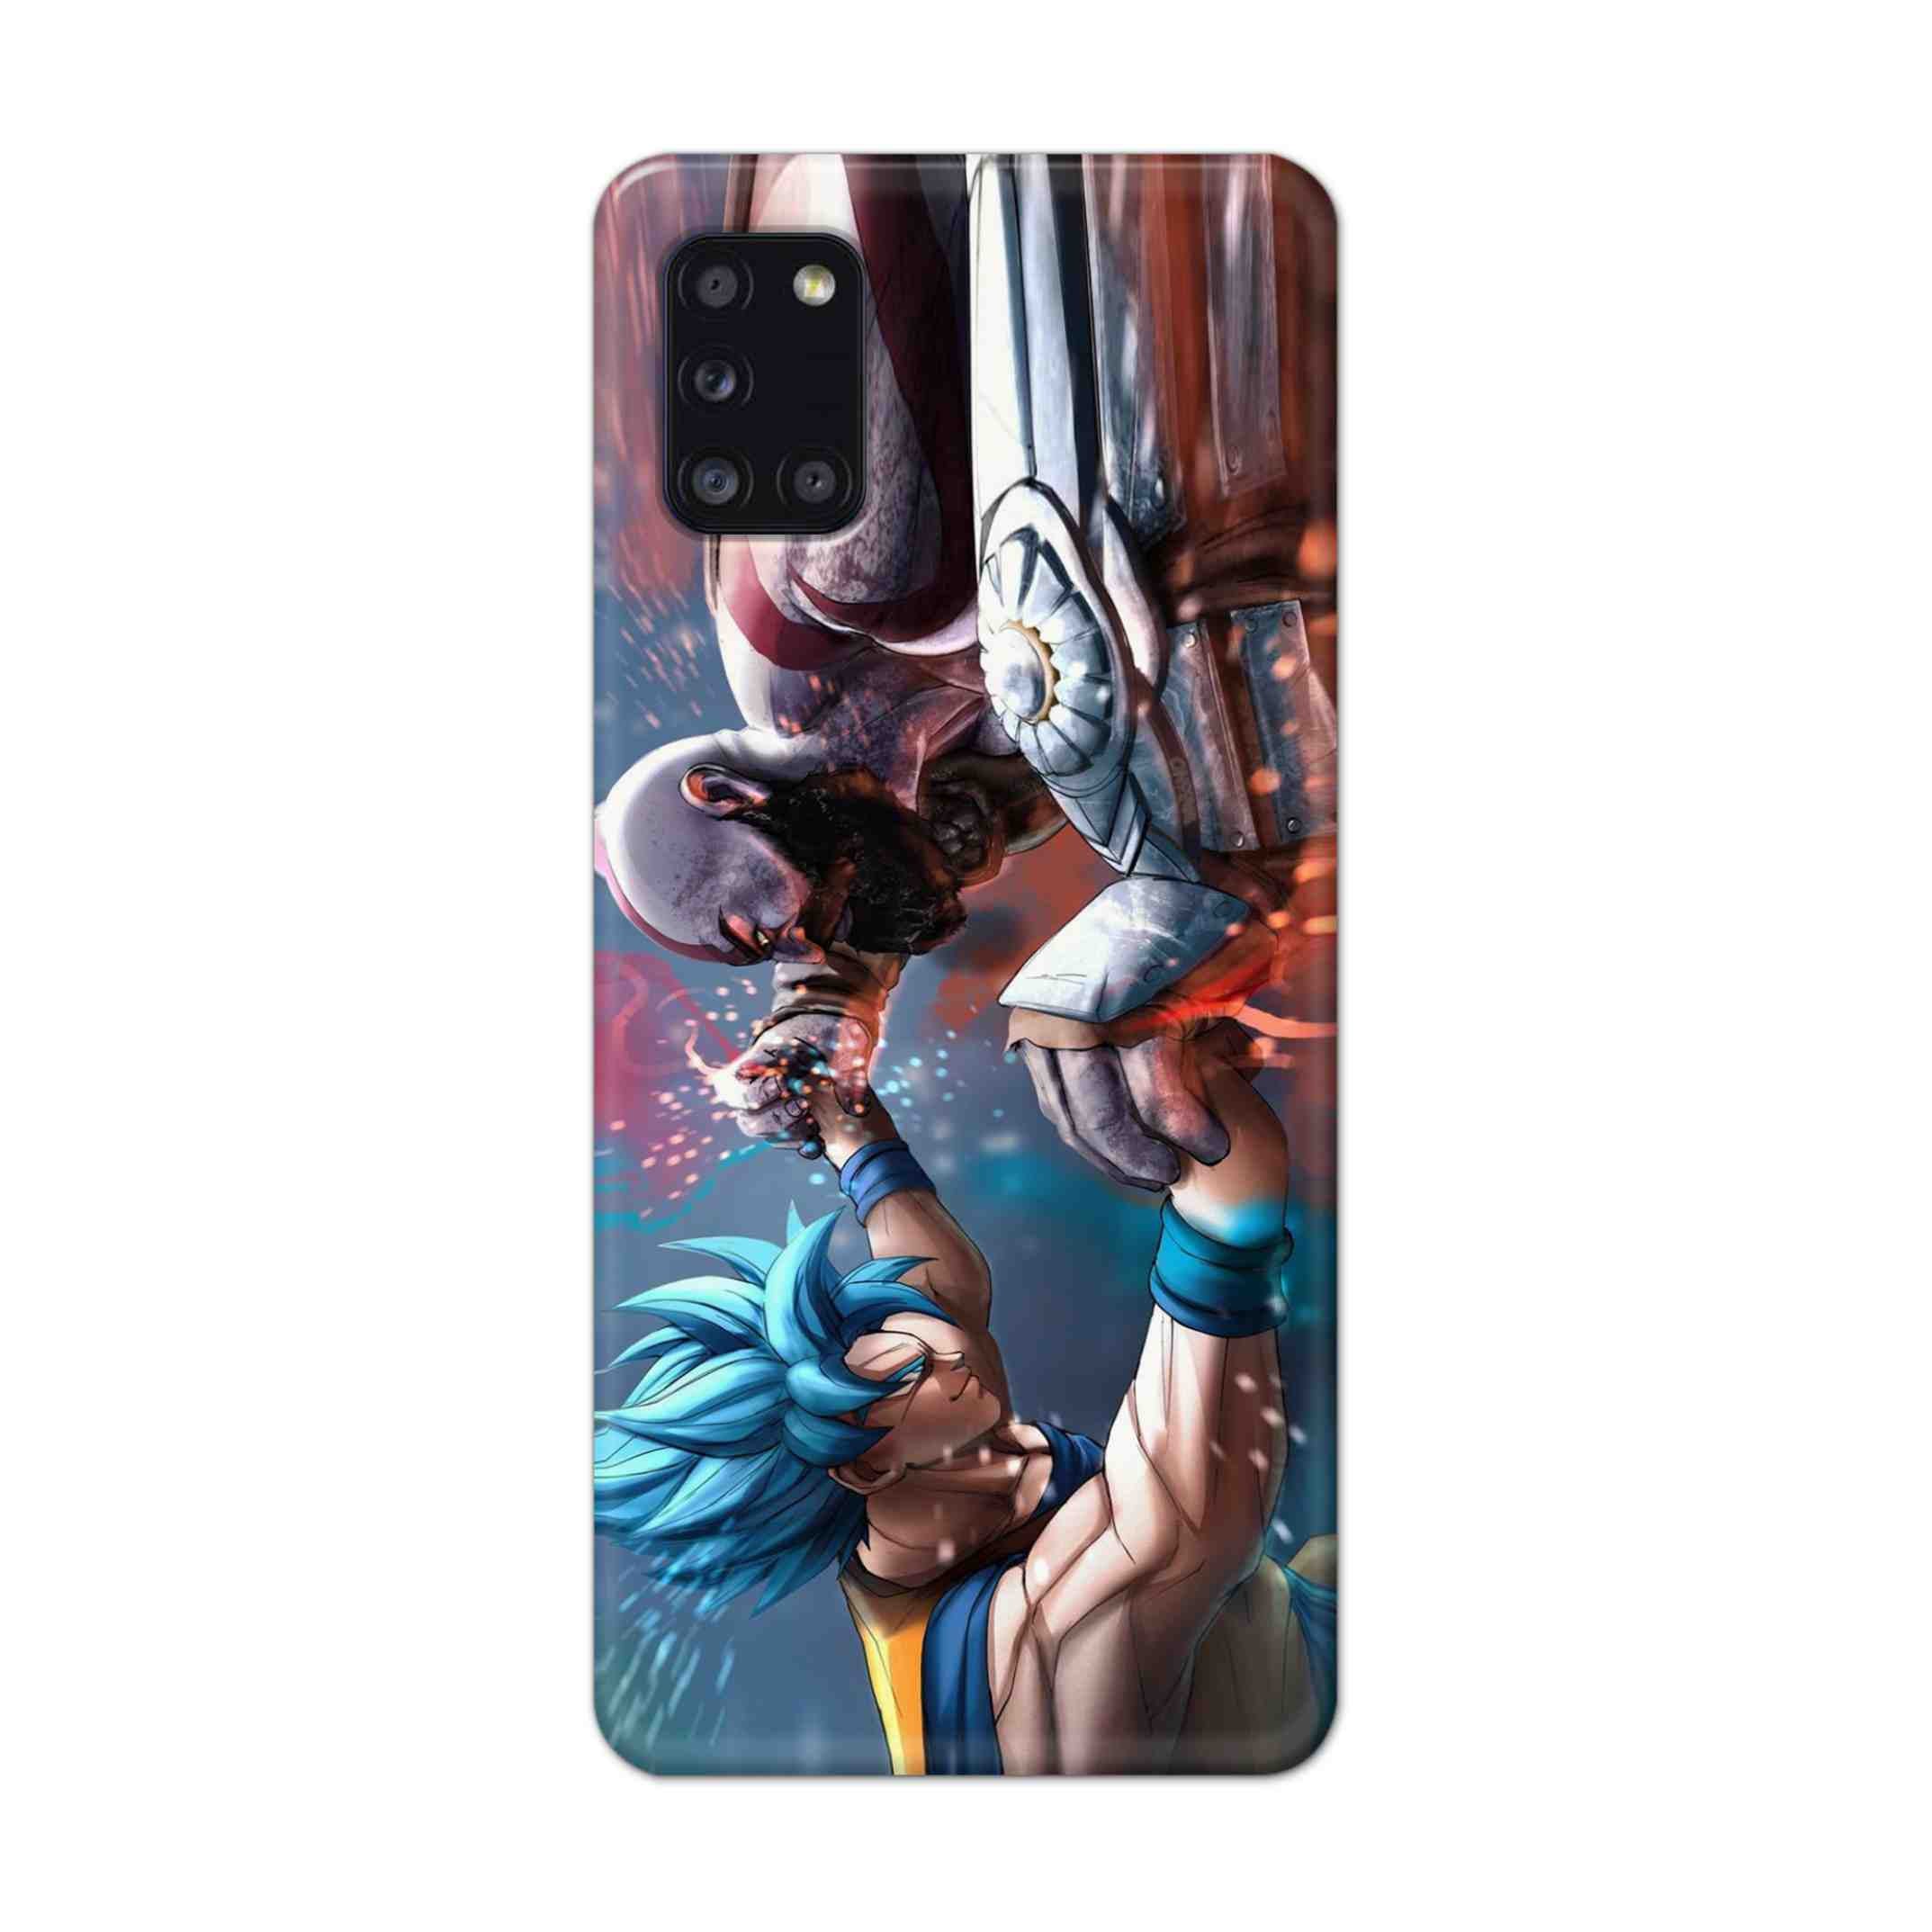 Buy Goku Vs Kratos Hard Back Mobile Phone Case Cover For Samsung Galaxy A31 Online